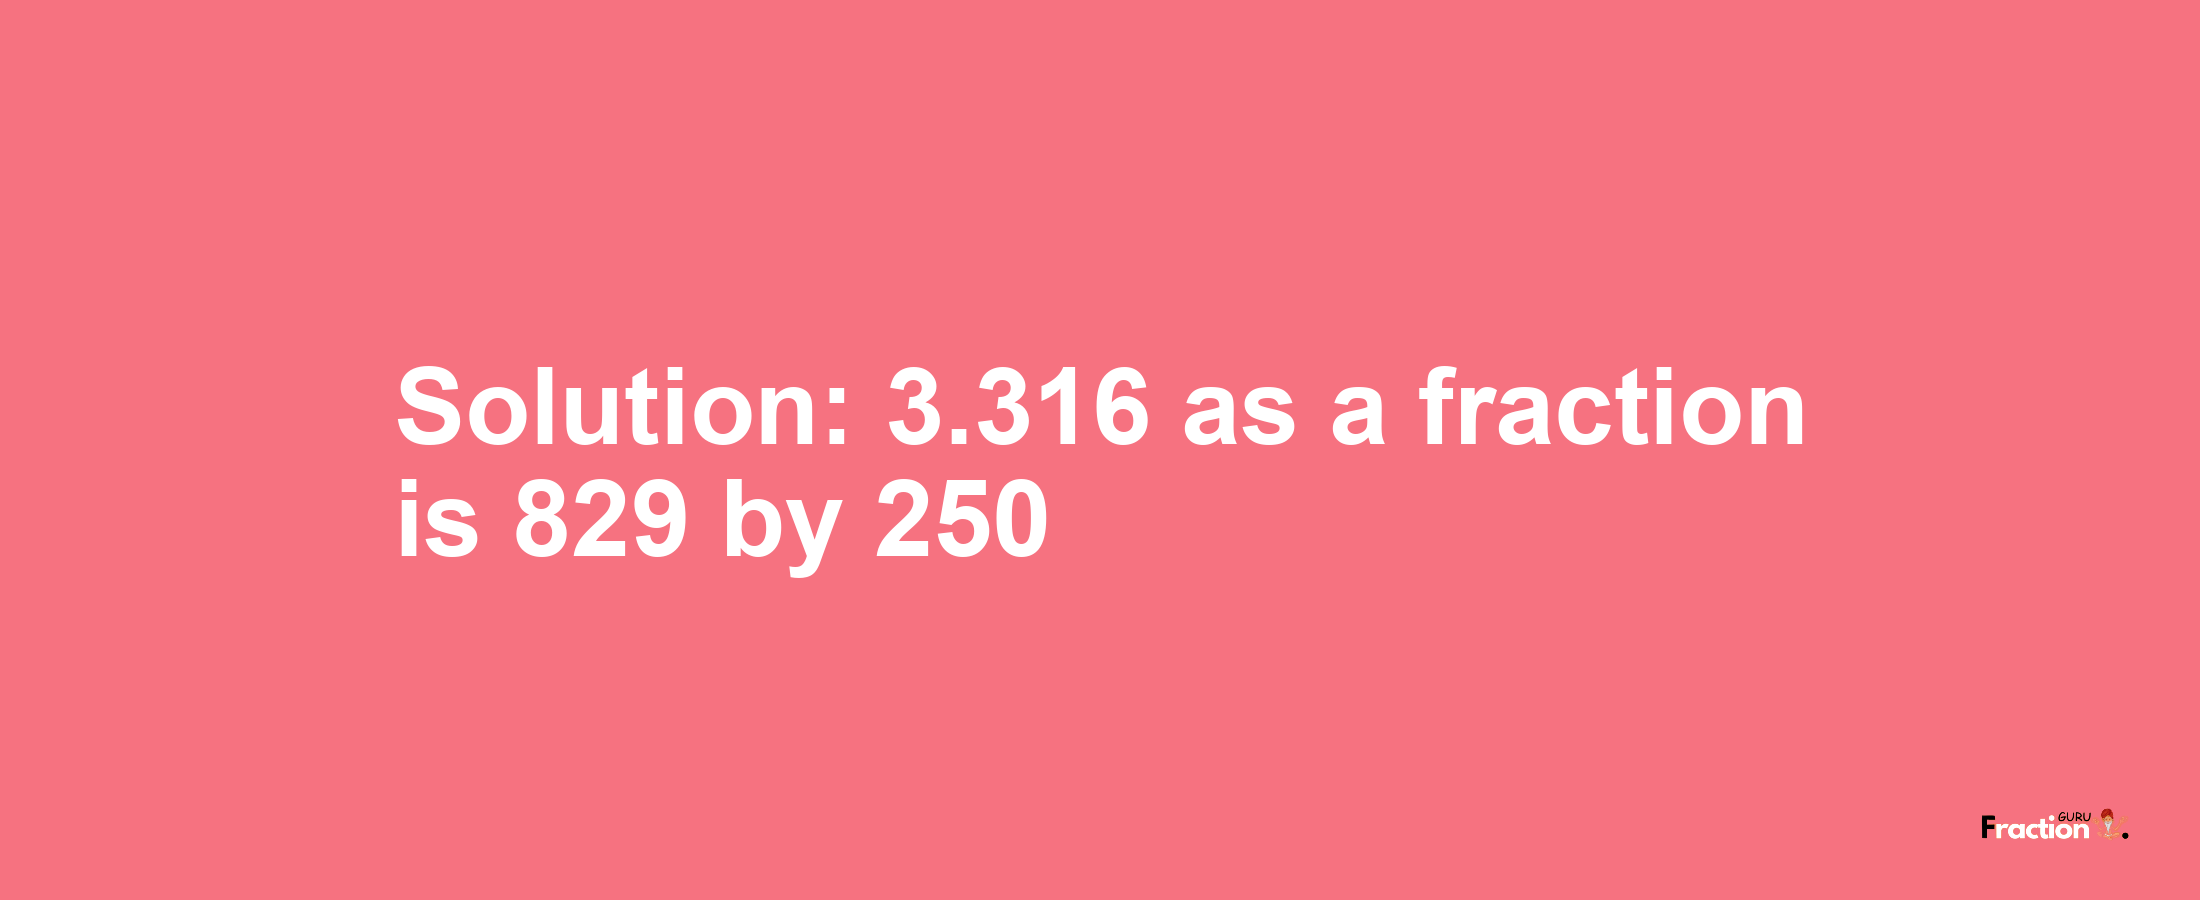 Solution:3.316 as a fraction is 829/250